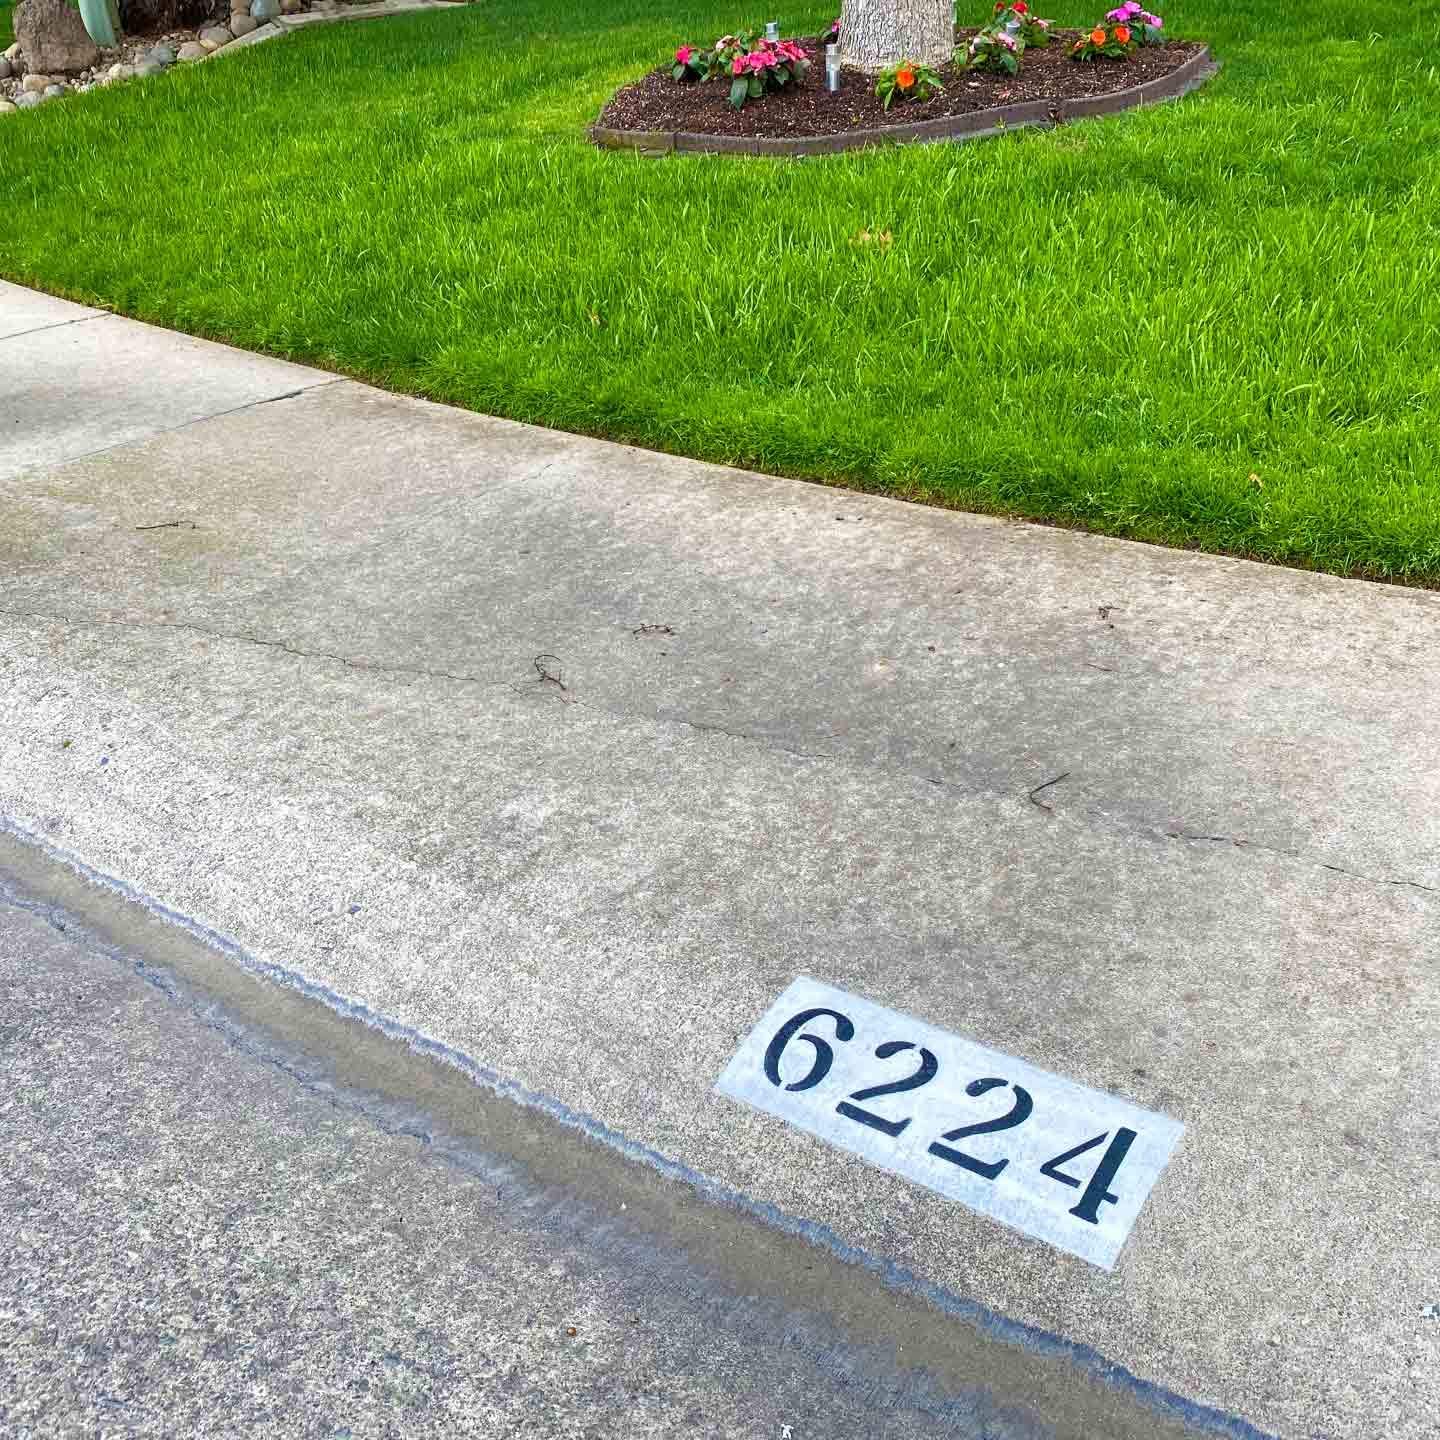  ASMPIO 7 Inch Curb Stencil Kit 0-9 Address Number Stencil,  20Pcs Reusable 14 Mil Mylar Plastic Numbers Stencils with Masking Tape for  Painting on Road, Wall, Wood, Mailbox(7Tall) : Tools 